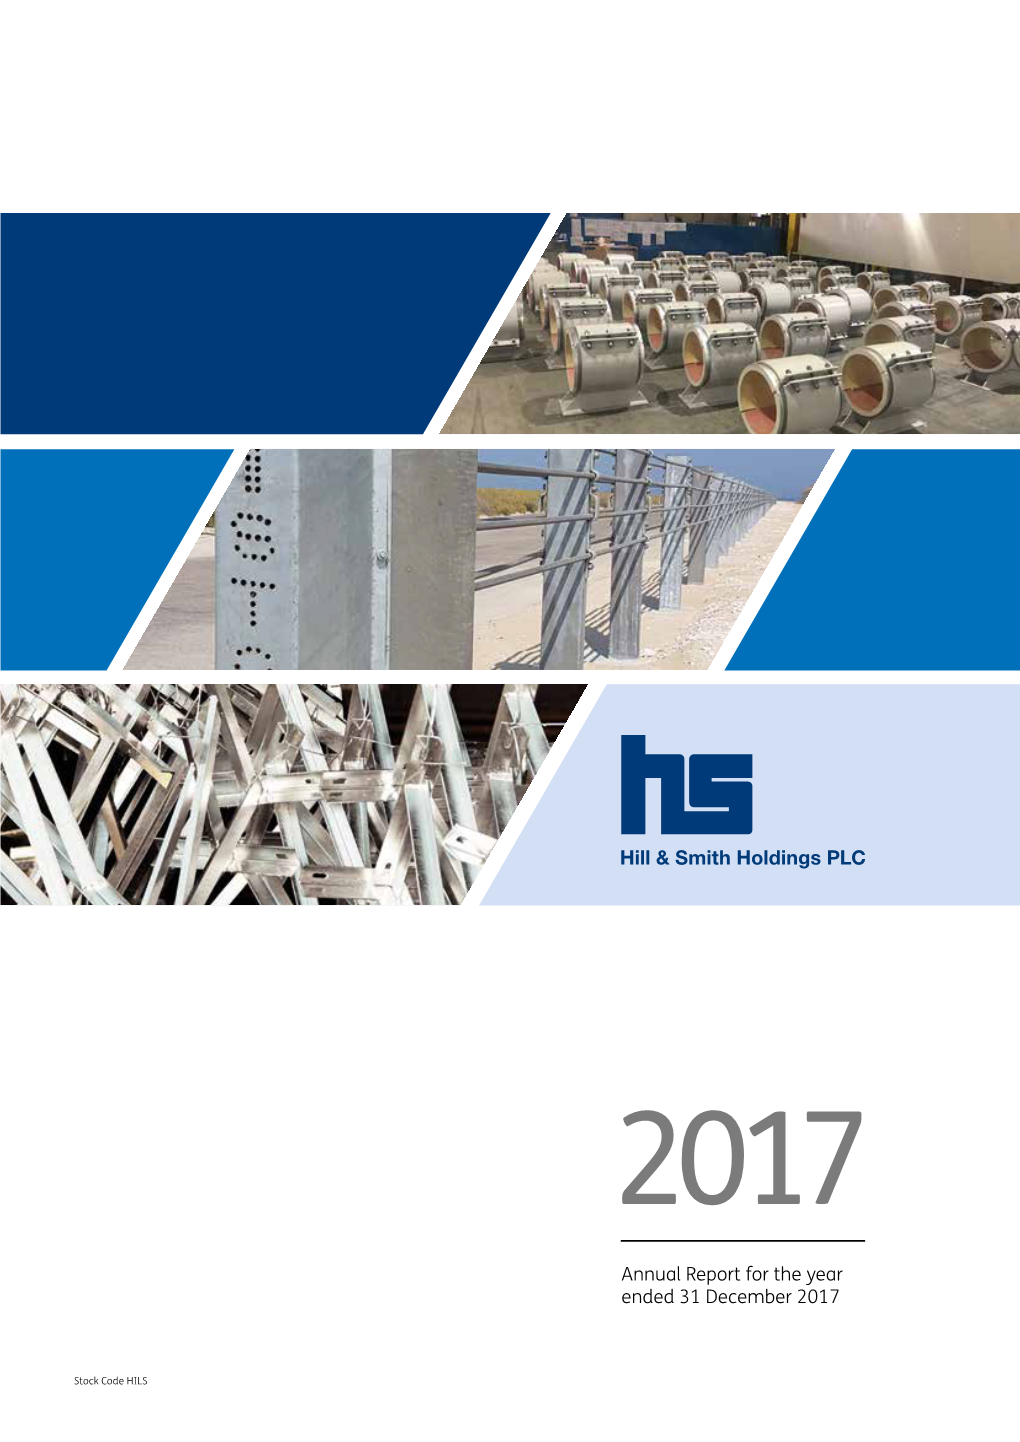 Annual Report for the Year Ended 31 December 2017